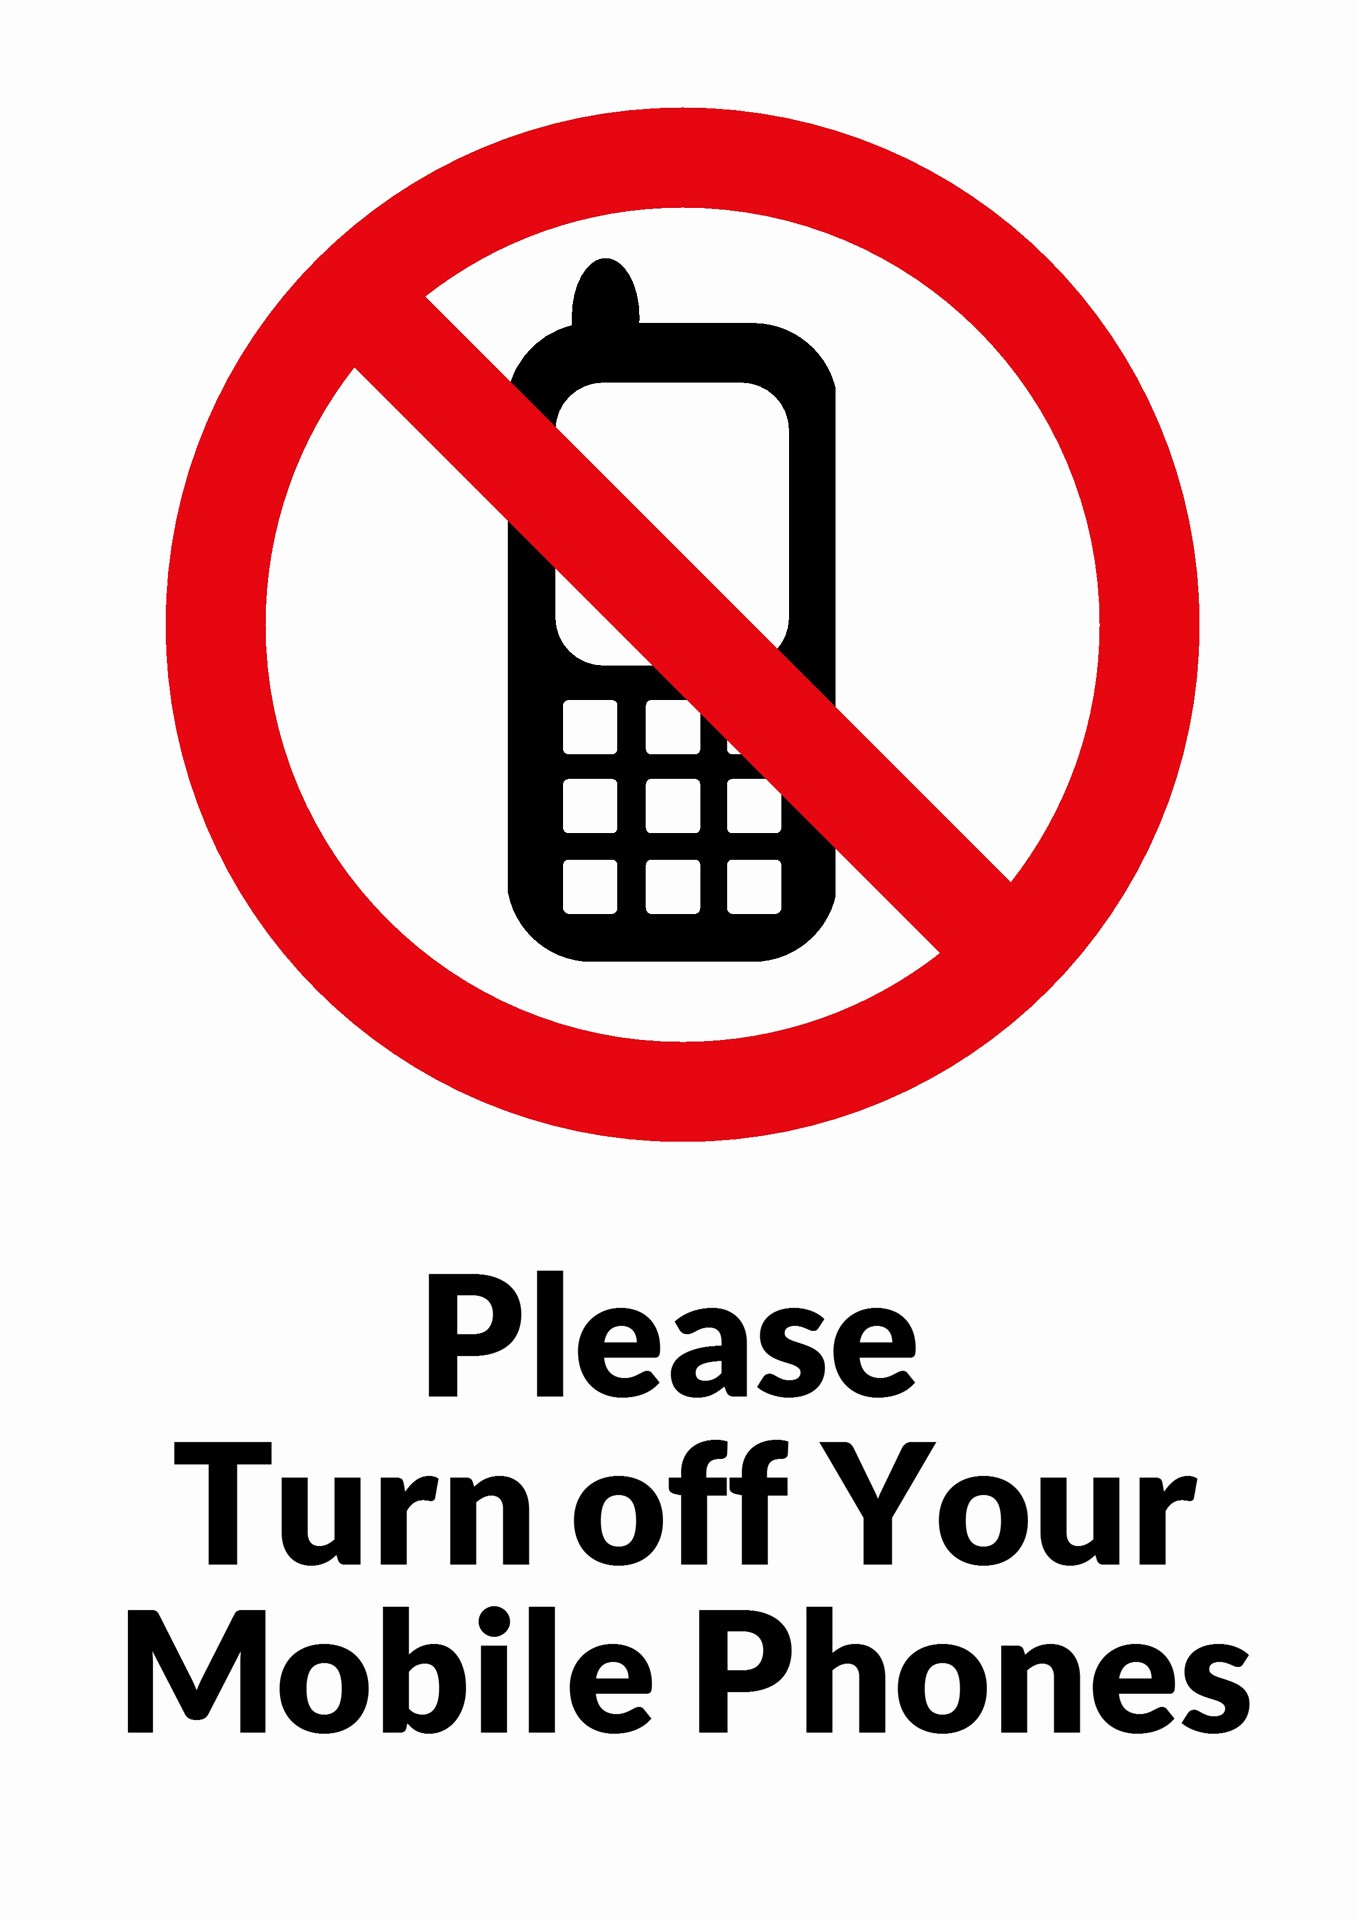 Turn Off Cell Phone Sign Unique Please Turn F Your Mobile Phones Free Stock